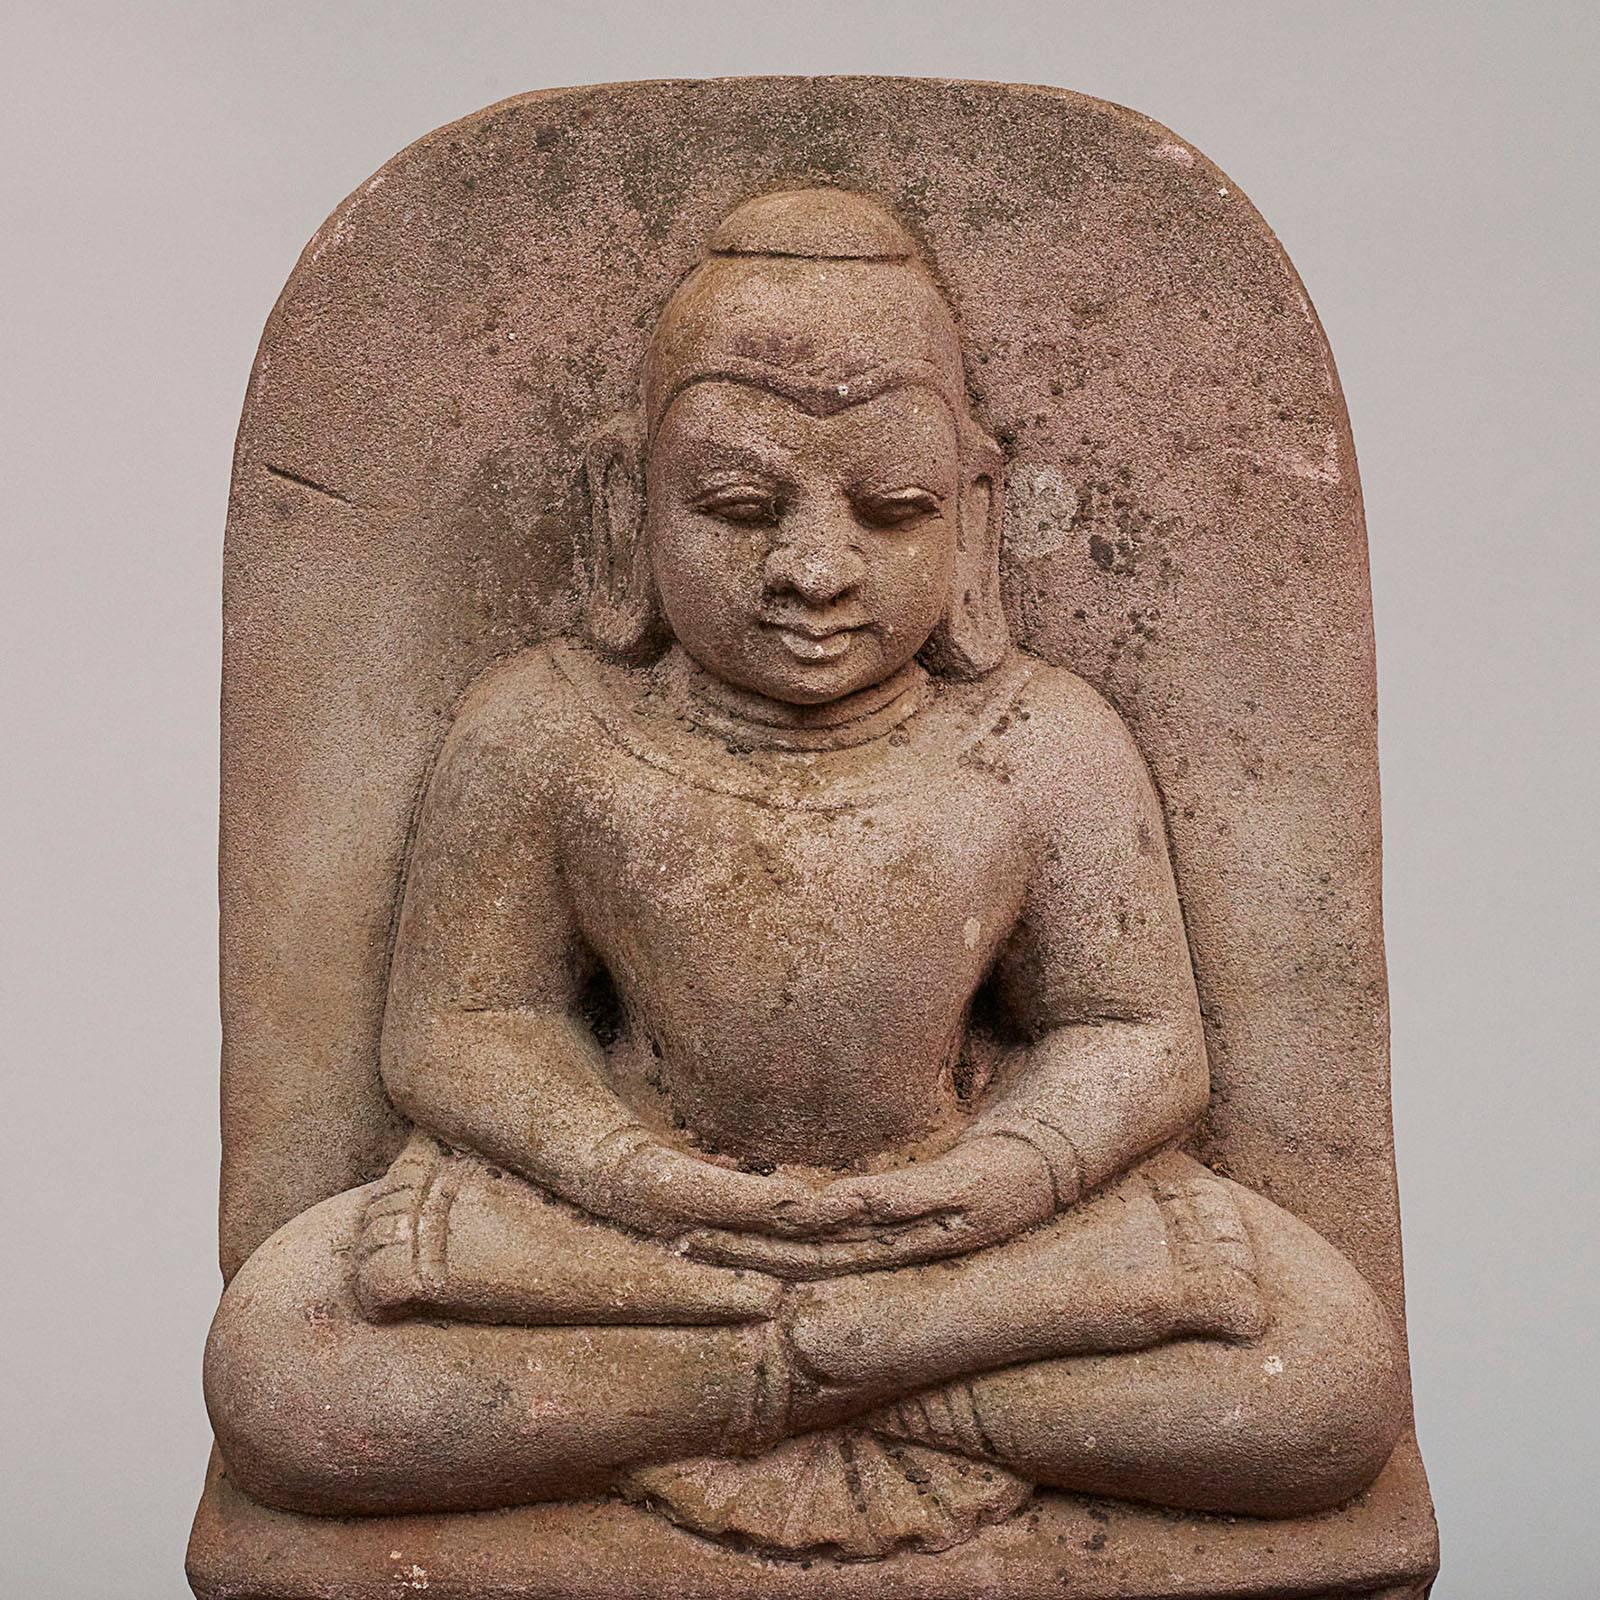 A powerful carved sandstone Burmese Buddha, circa 1600-1700, carved in meditation with crossed legs and arms referred to as 